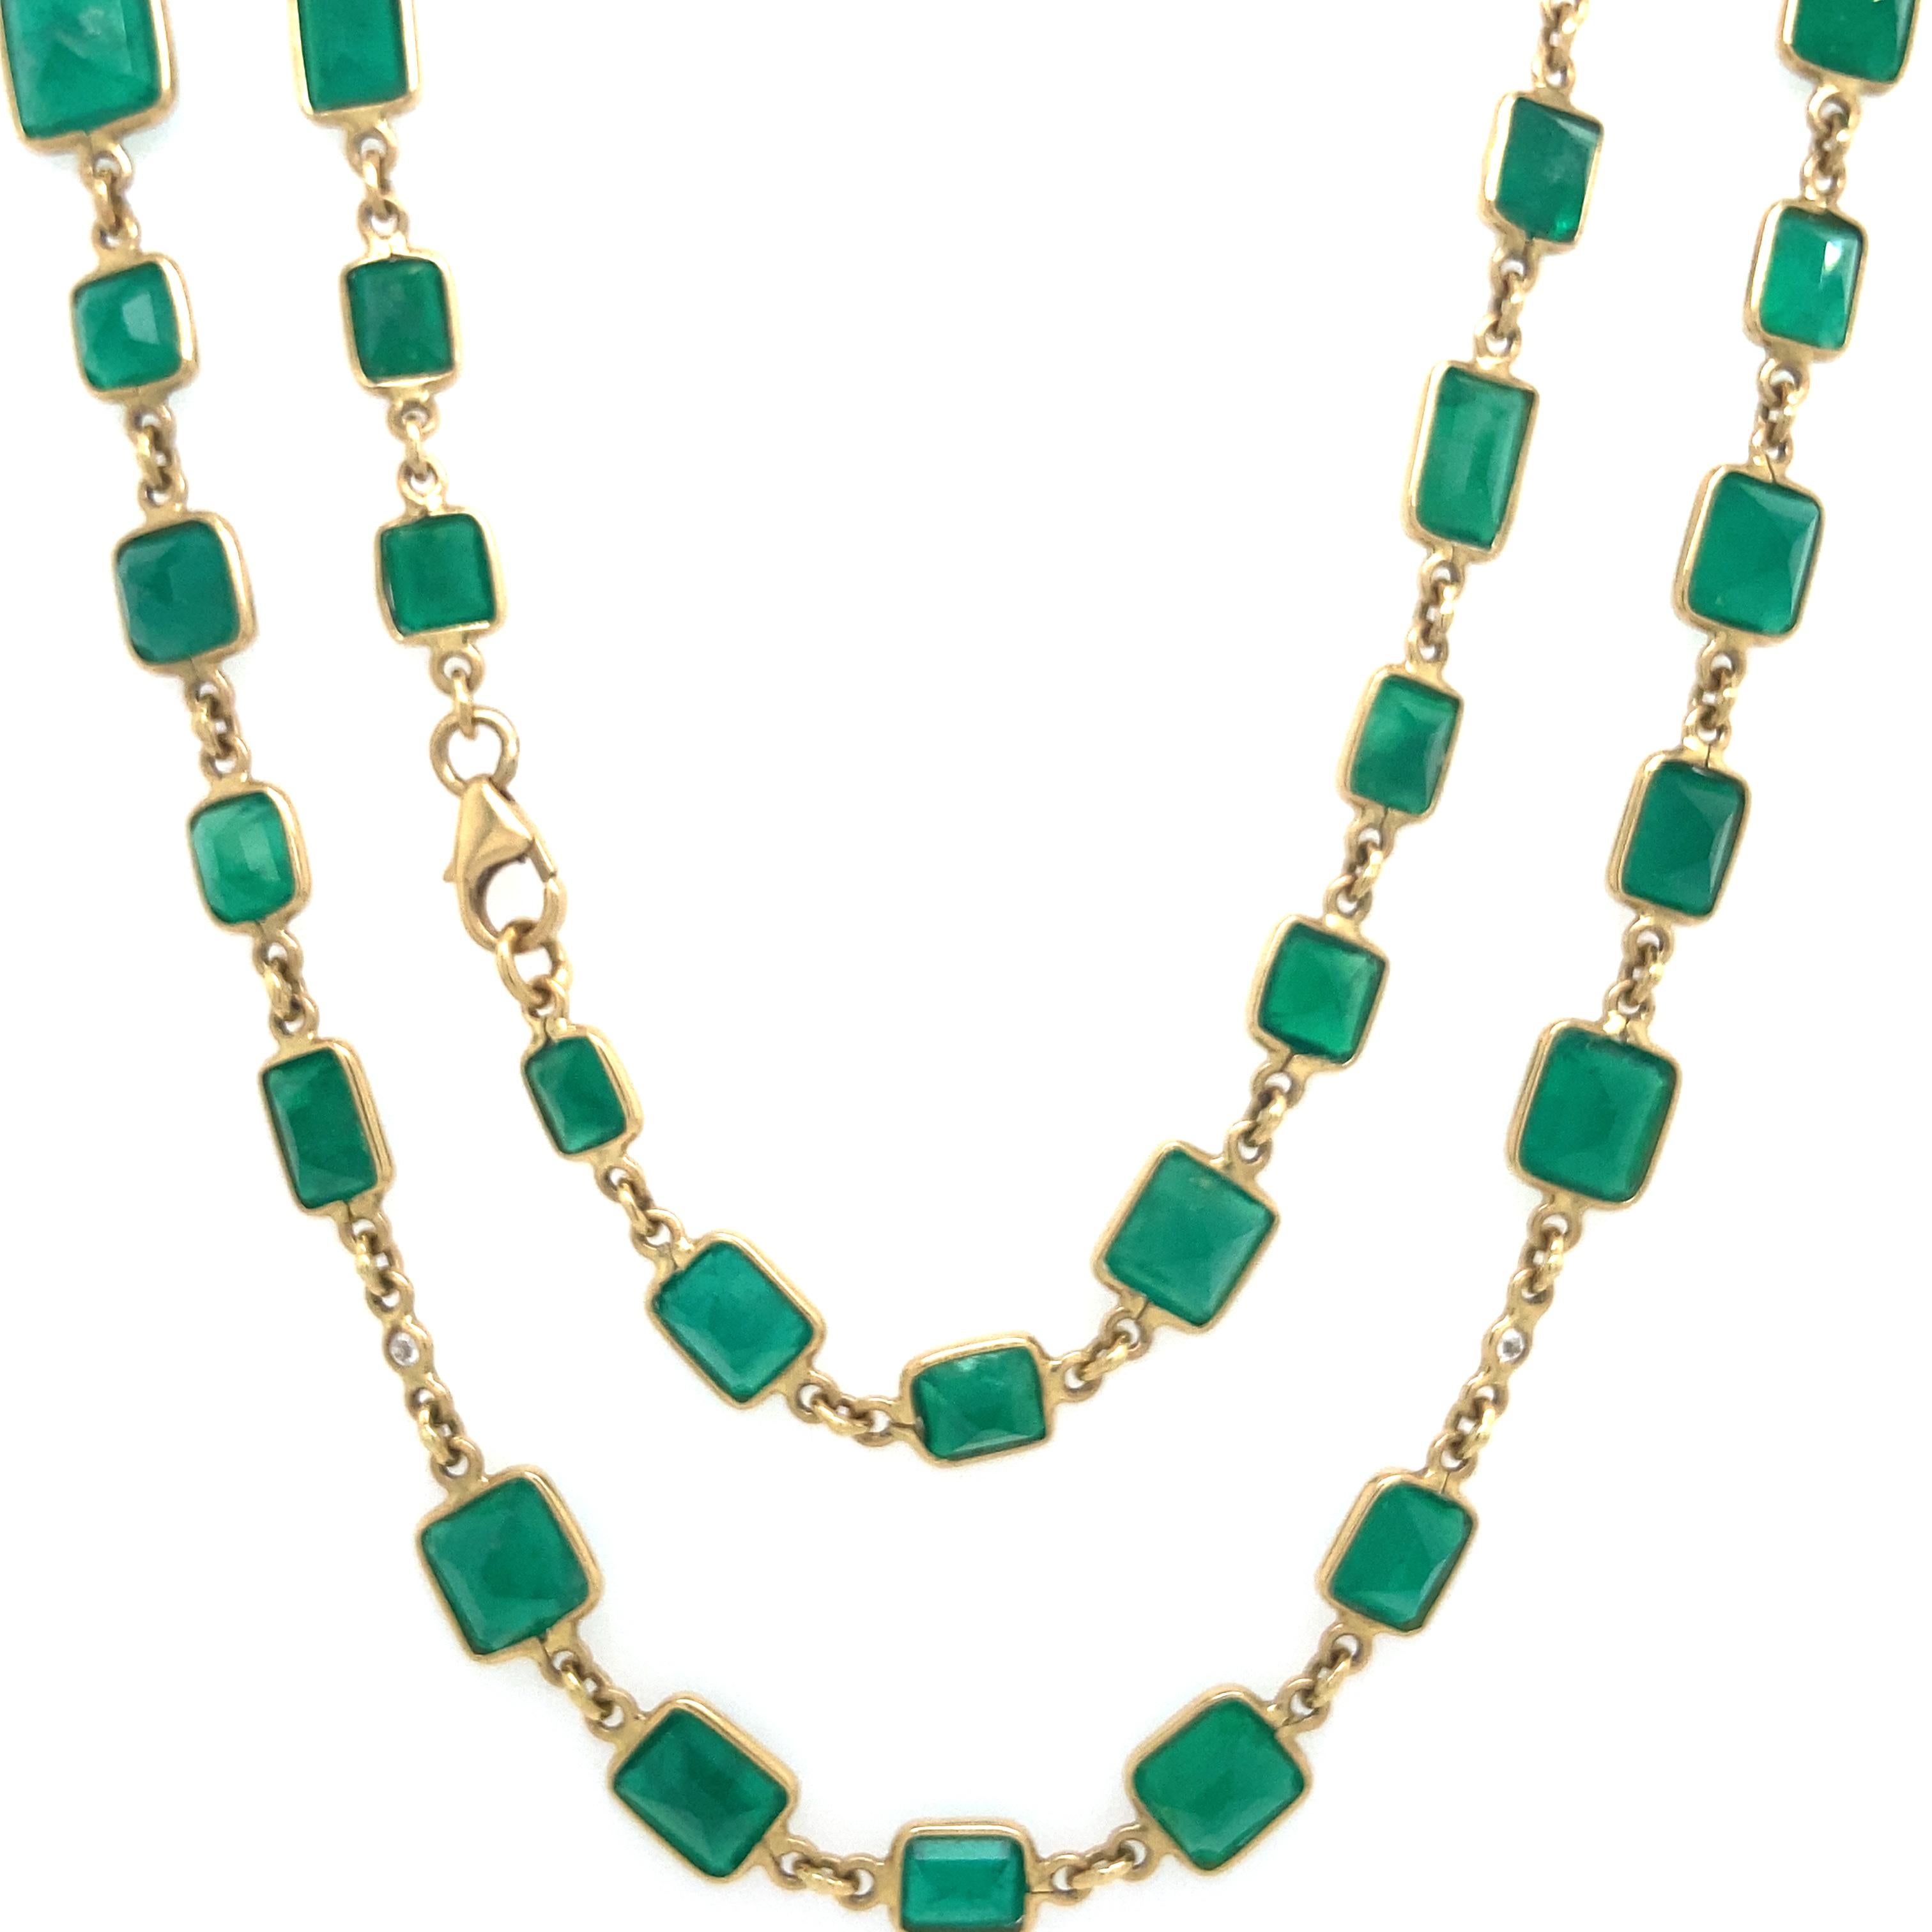 18K Yellow Gold
Emerald: 36.56ct total weight.
All diamonds are G-H/SI stones.